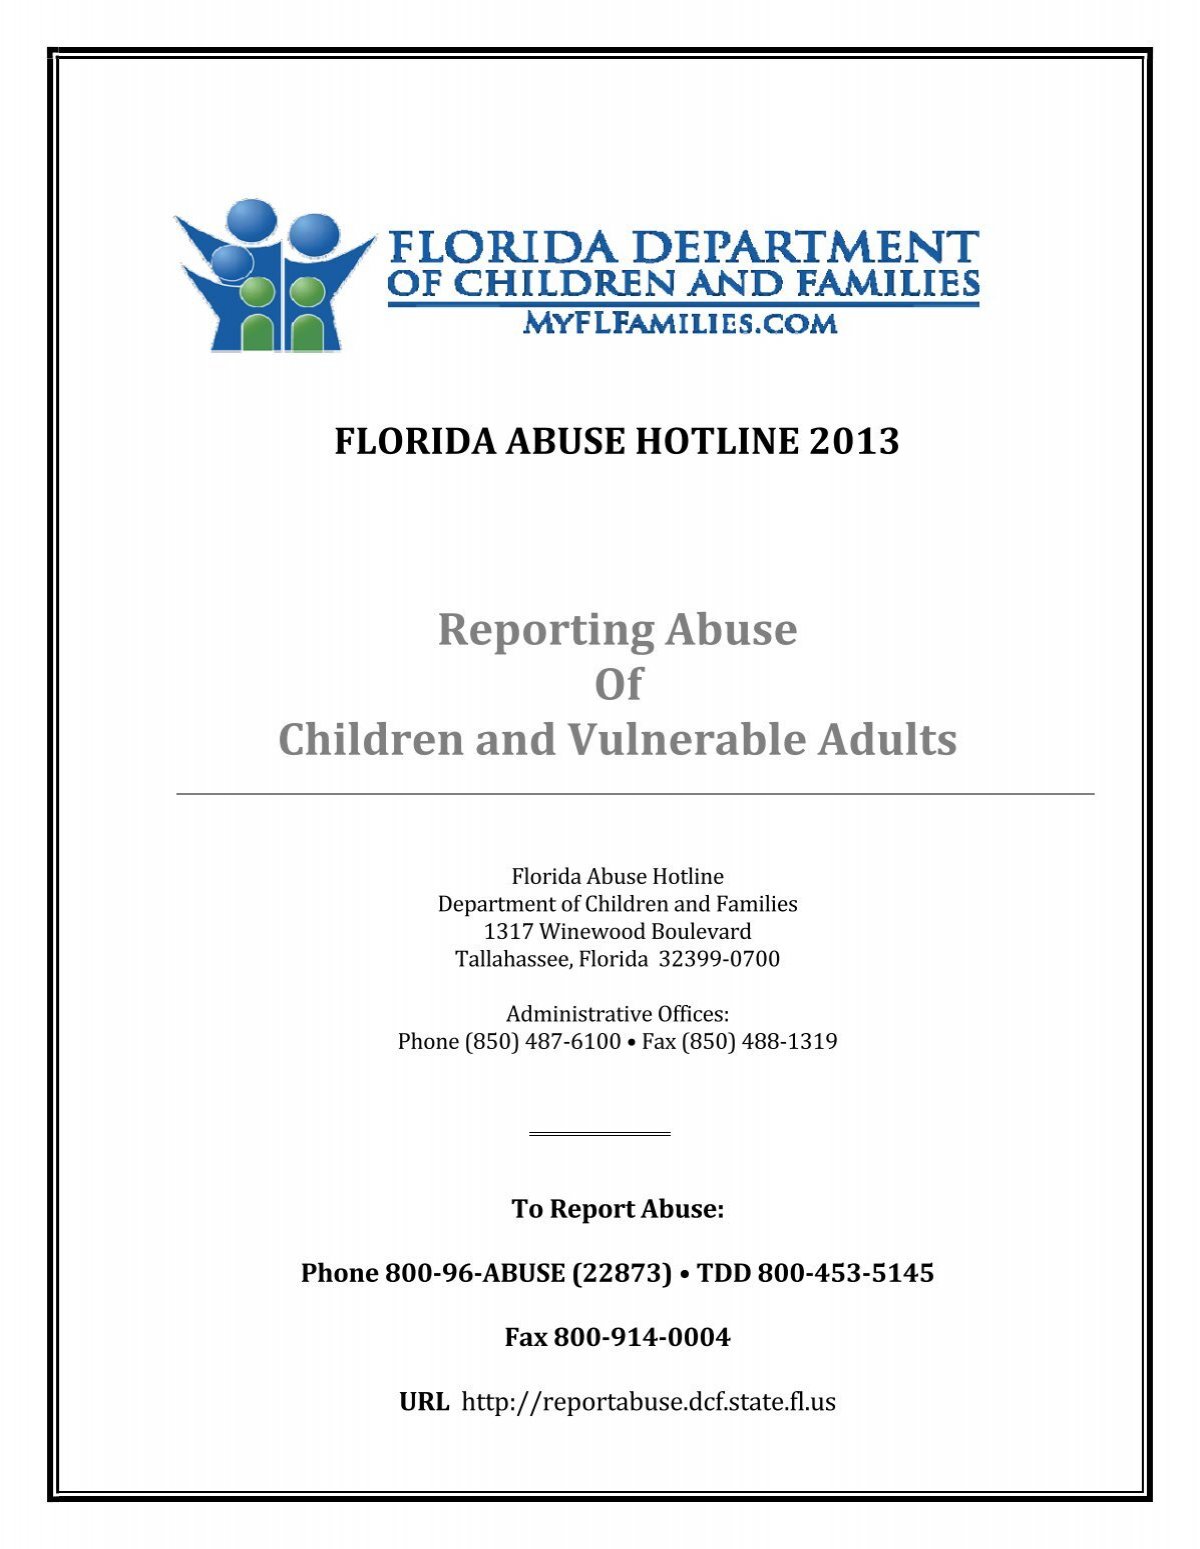 dcf-reporting-abuse-of-children-and-vulnerable-adults-florida